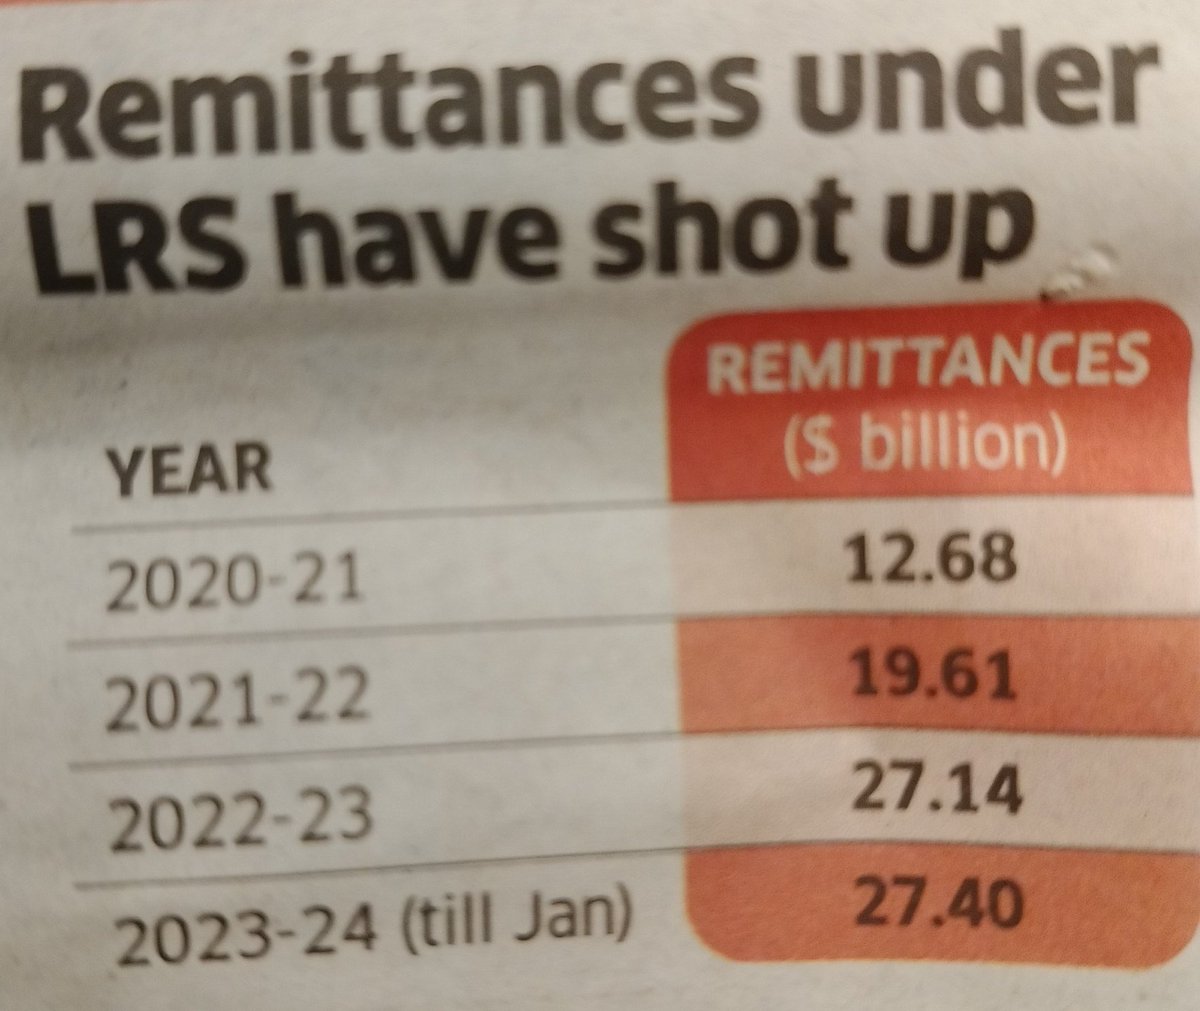 Indians are sending more and more money abroad (via Liberalised Remittance Scheme).
LRS remittances from India have shot up by more than 2.5 times in just the last 3 years.
Indians are getting rich but they aren't investing in India? Why?
#LRS